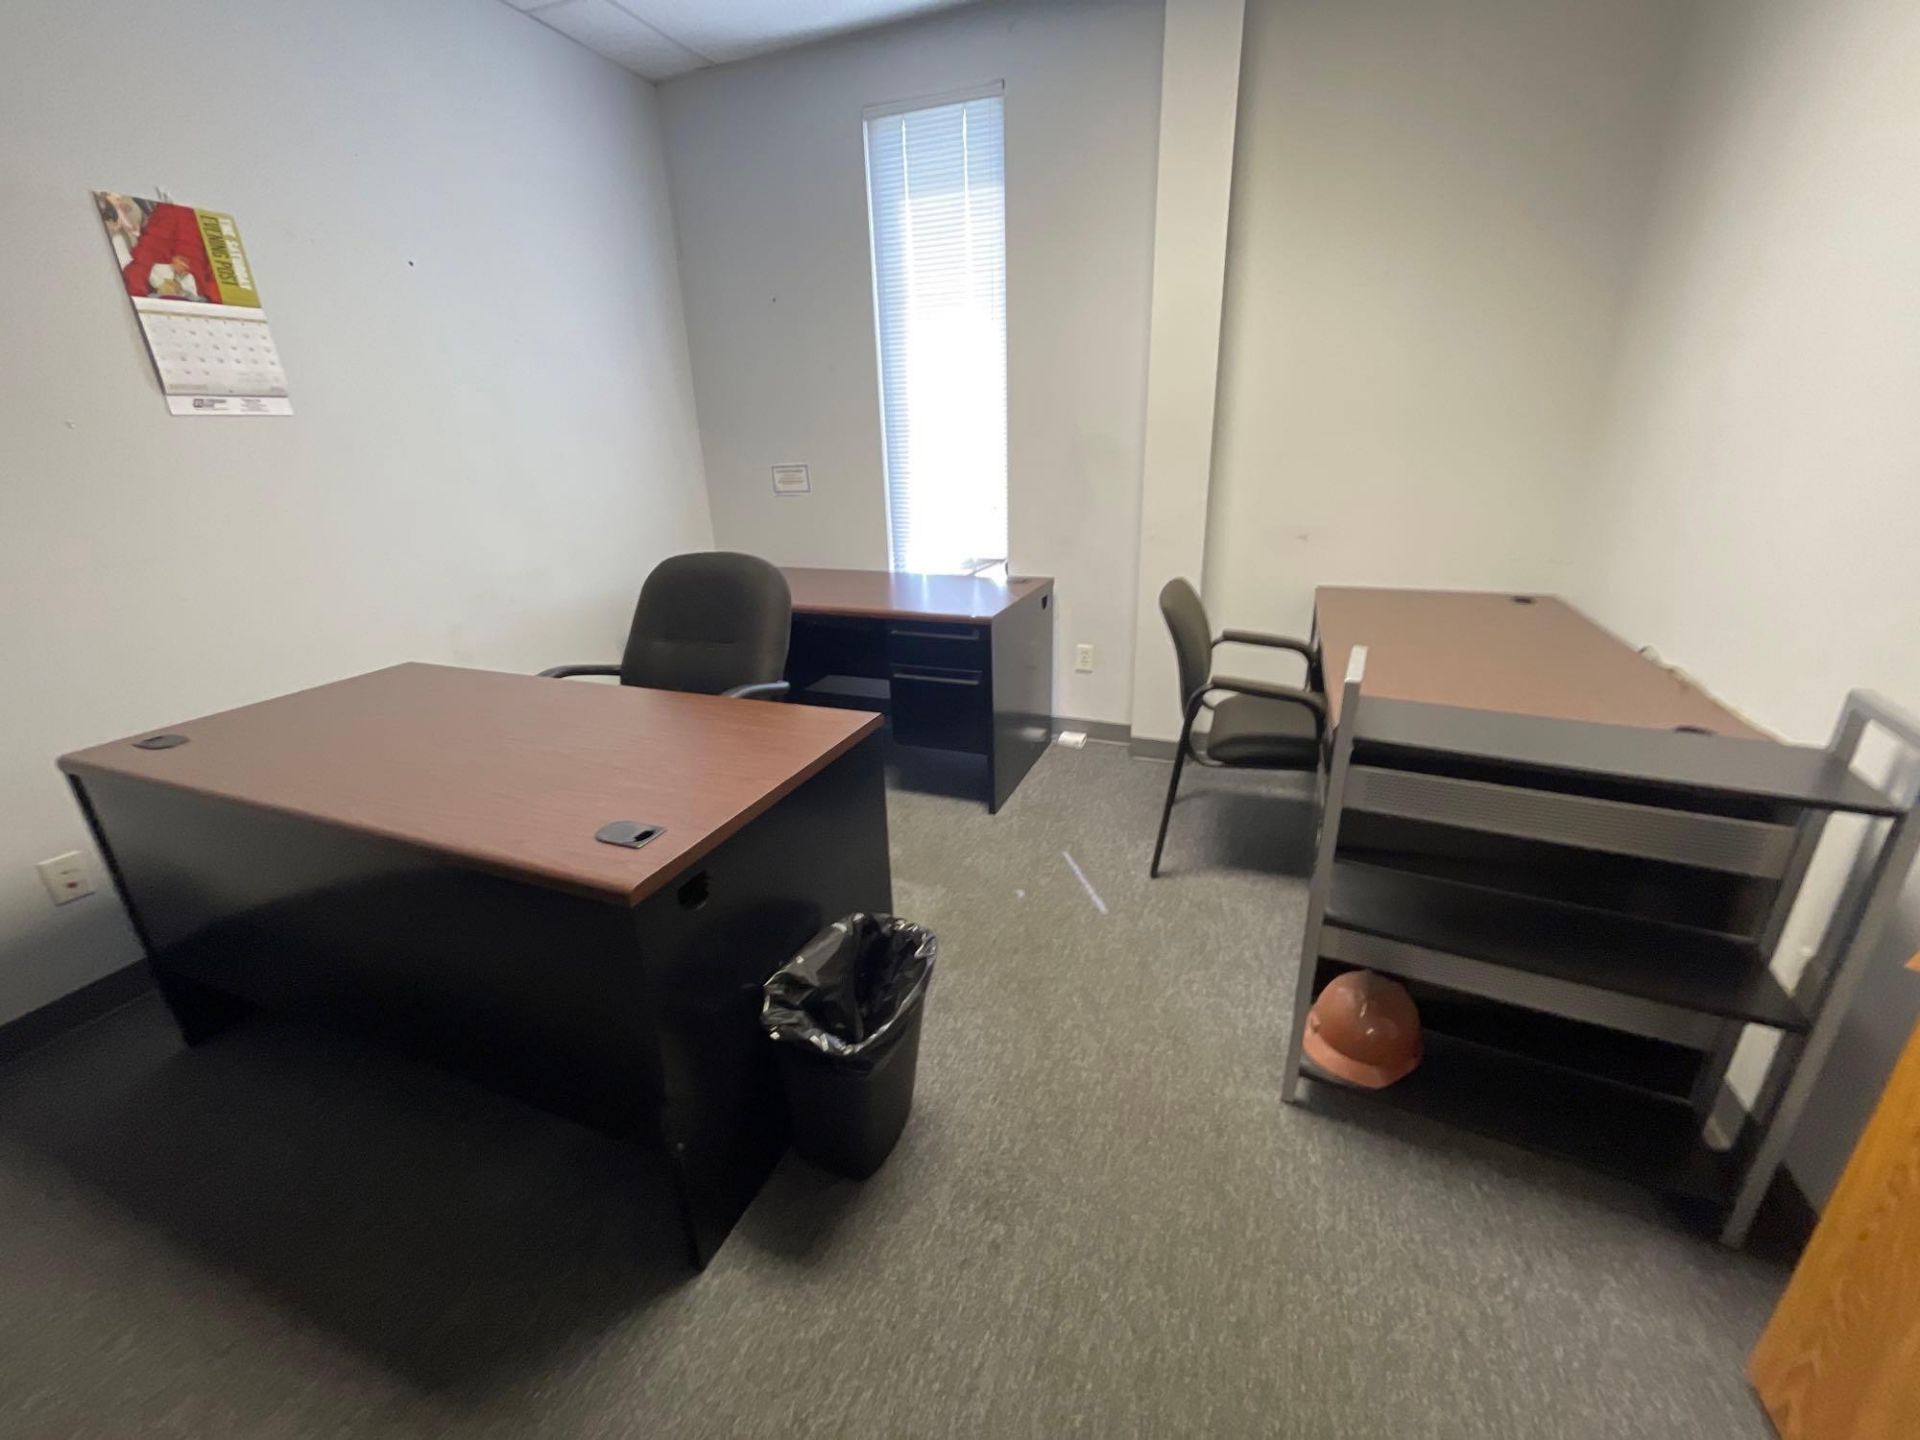 Office Furniture: Room 2, Room 3: Desks, Chairs, File Cabinets. See Photo